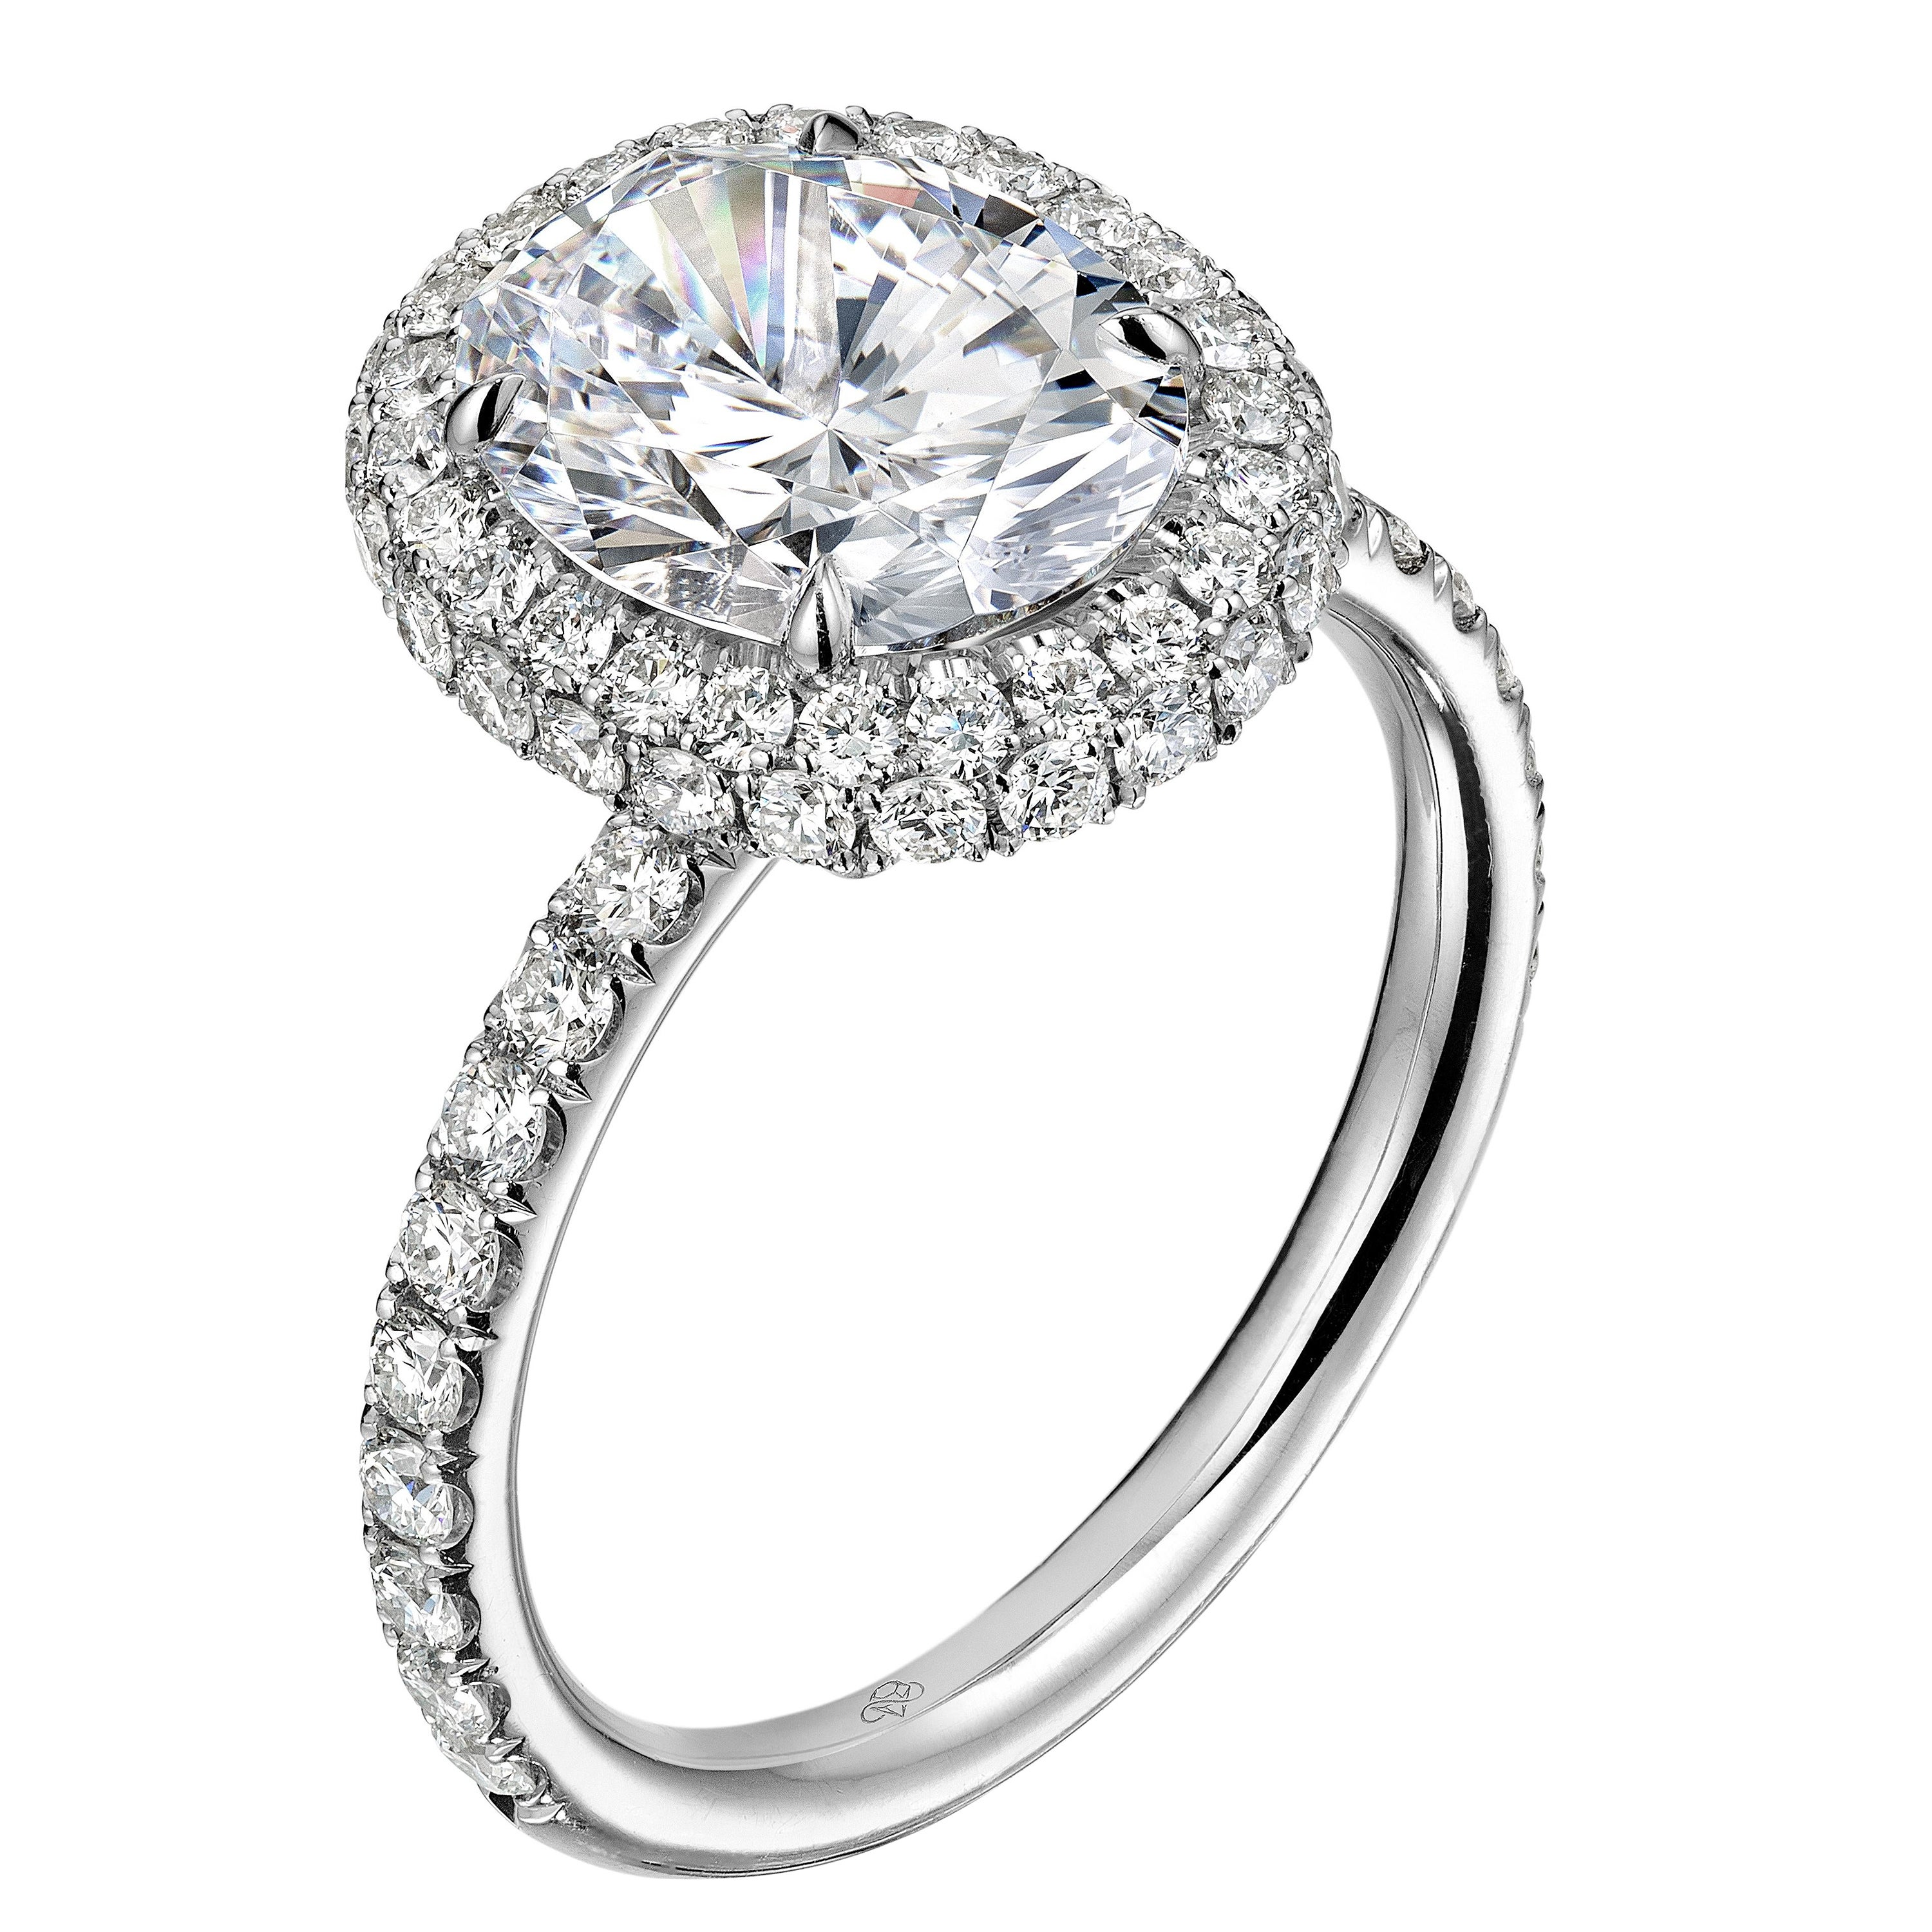 GIA Certified 2.50 Carat E SI1 Oval Diamond Engagement Ring "Camila"